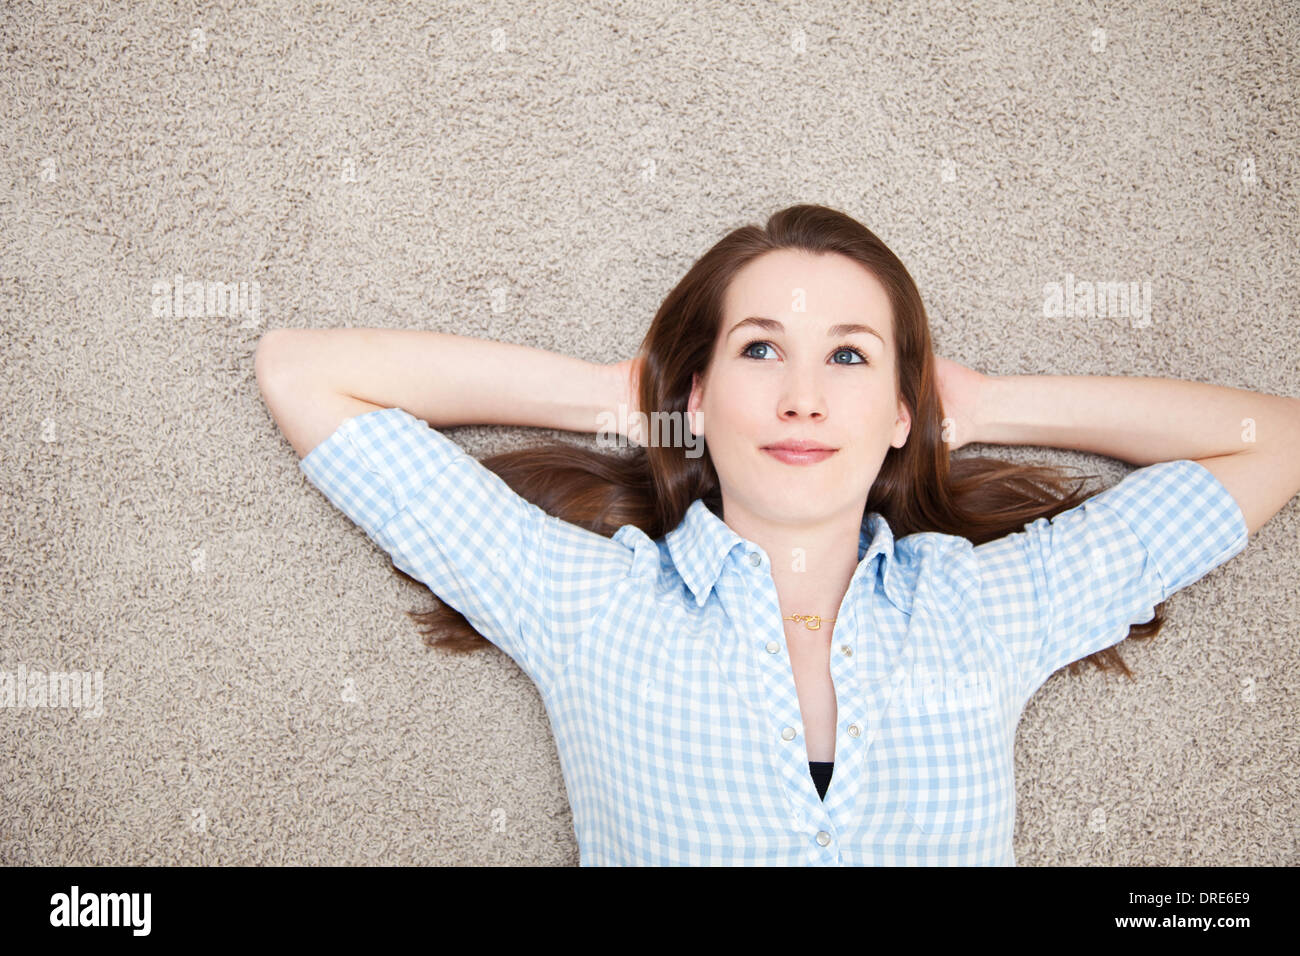 Attractive young woman lying on floor Stock Photo